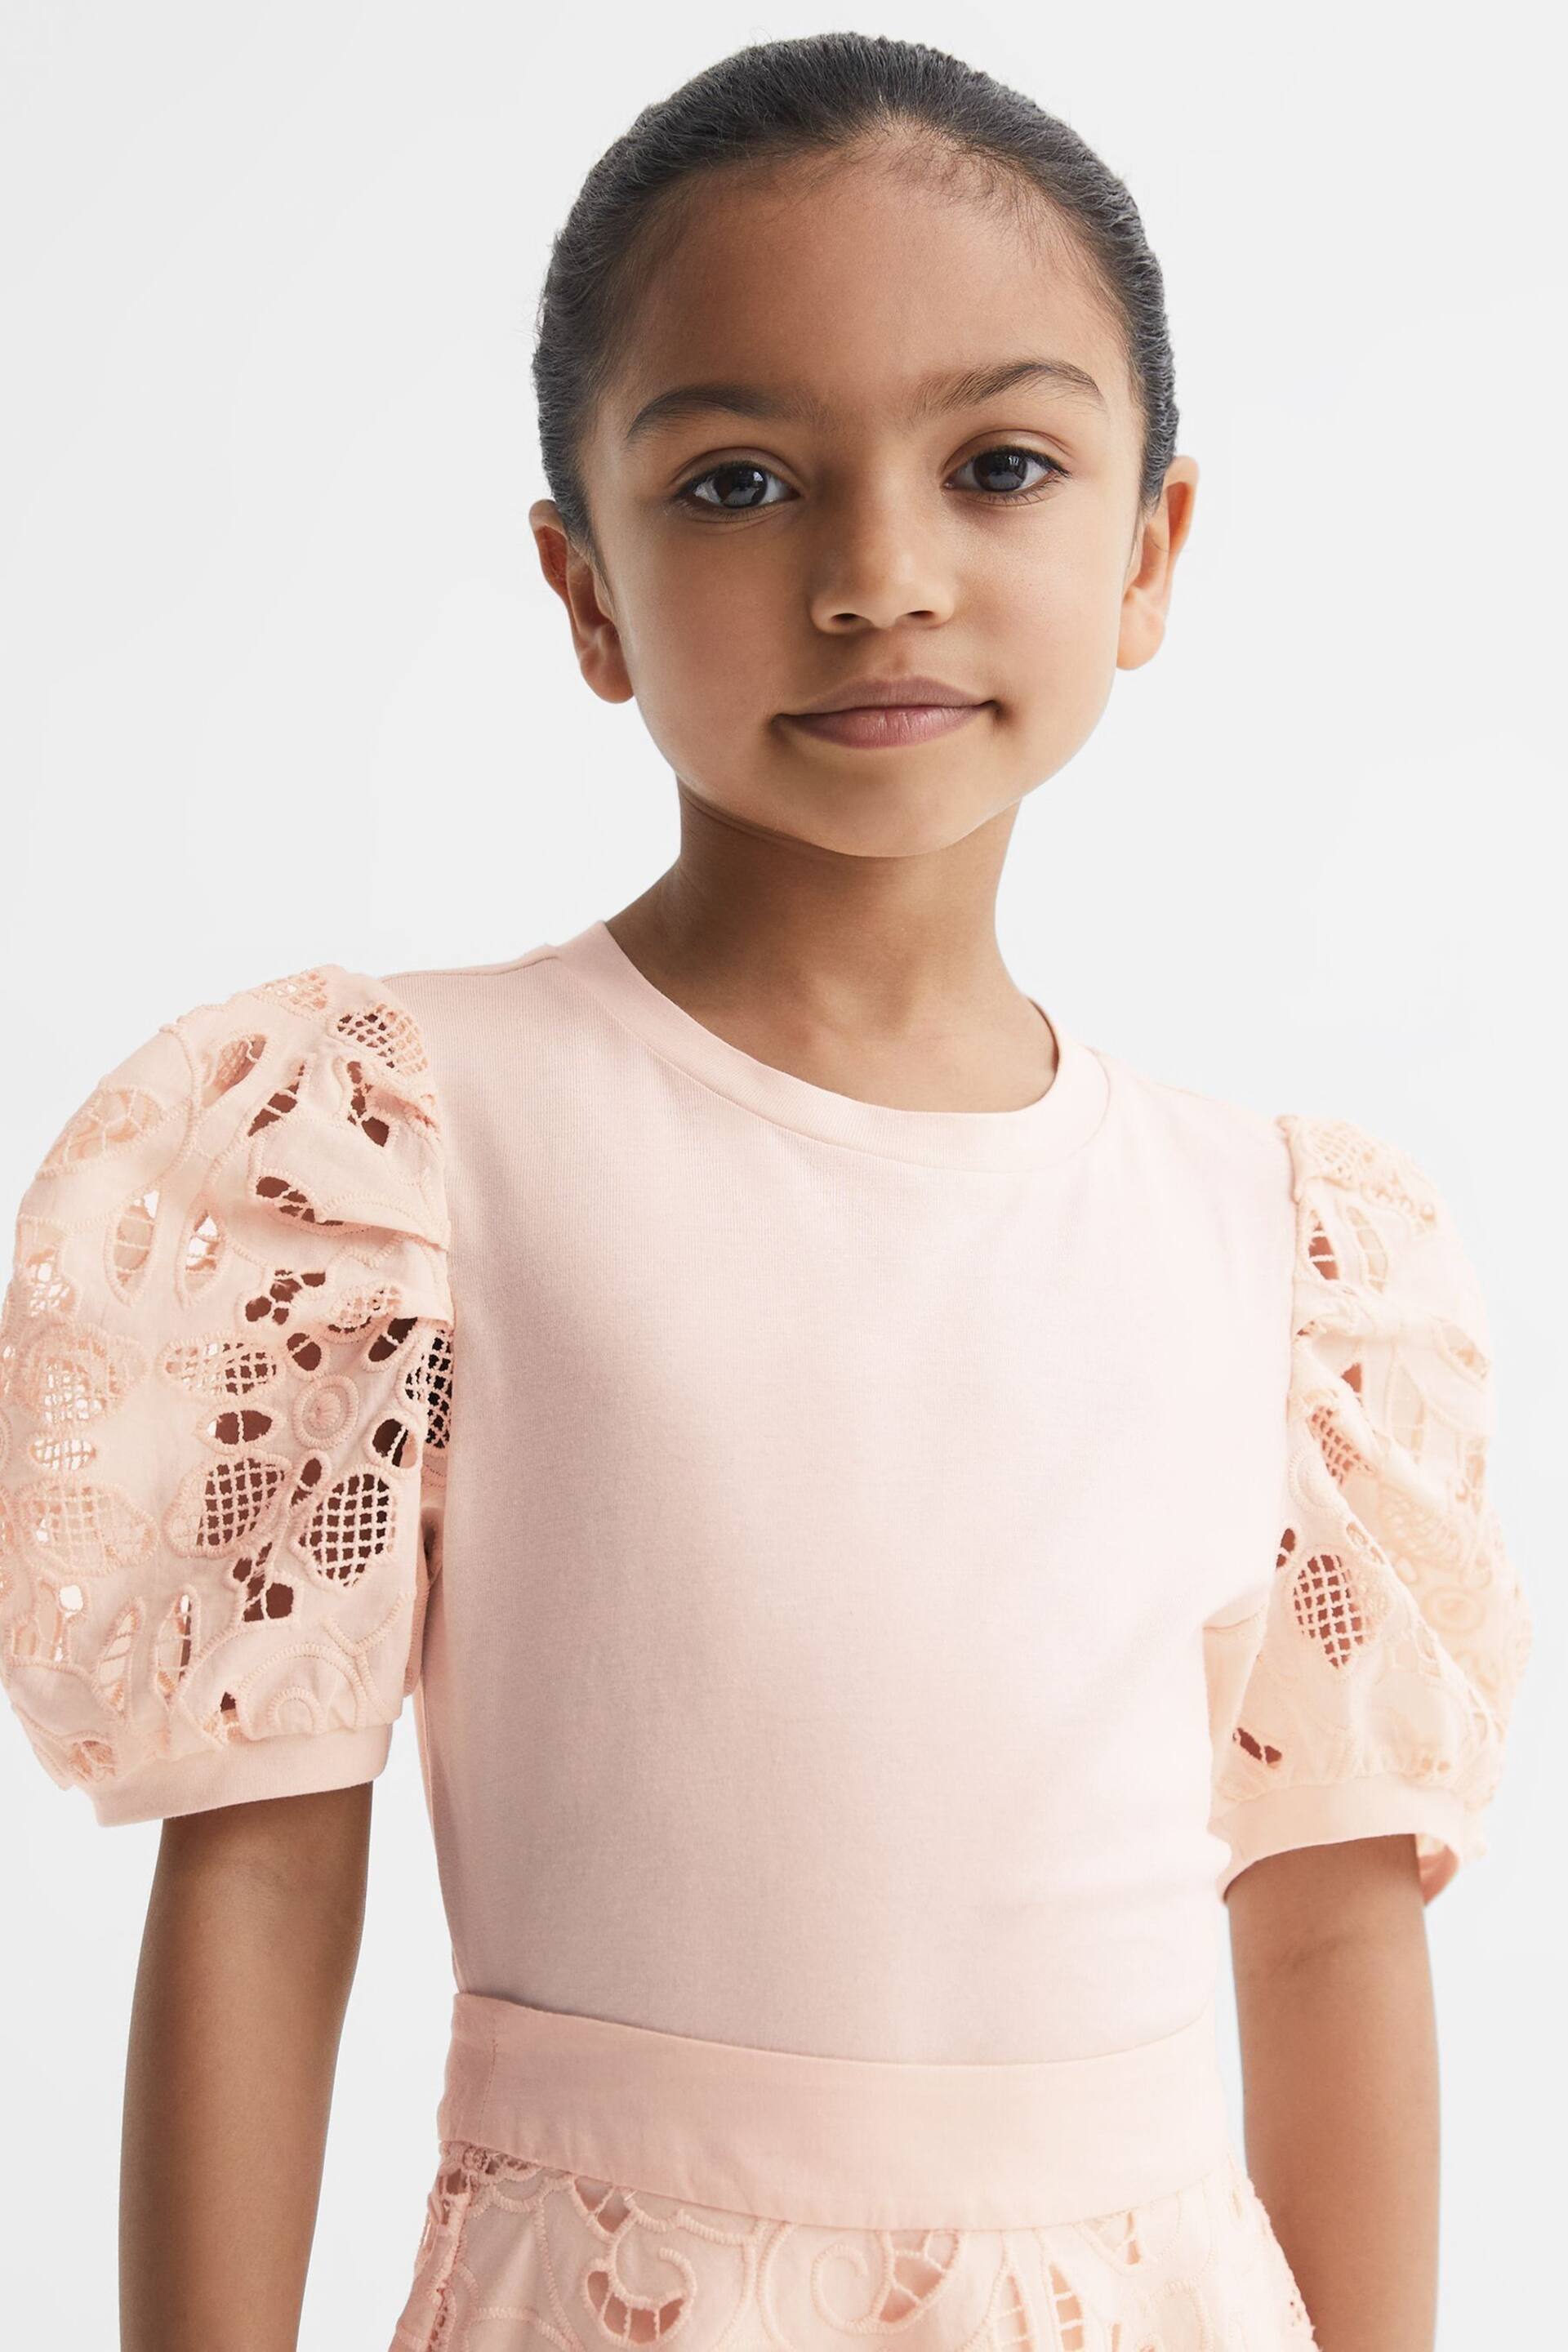 Reiss Pink Alberta Junior Floral Lace Puff Sleeve T-Shirt - Image 1 of 6